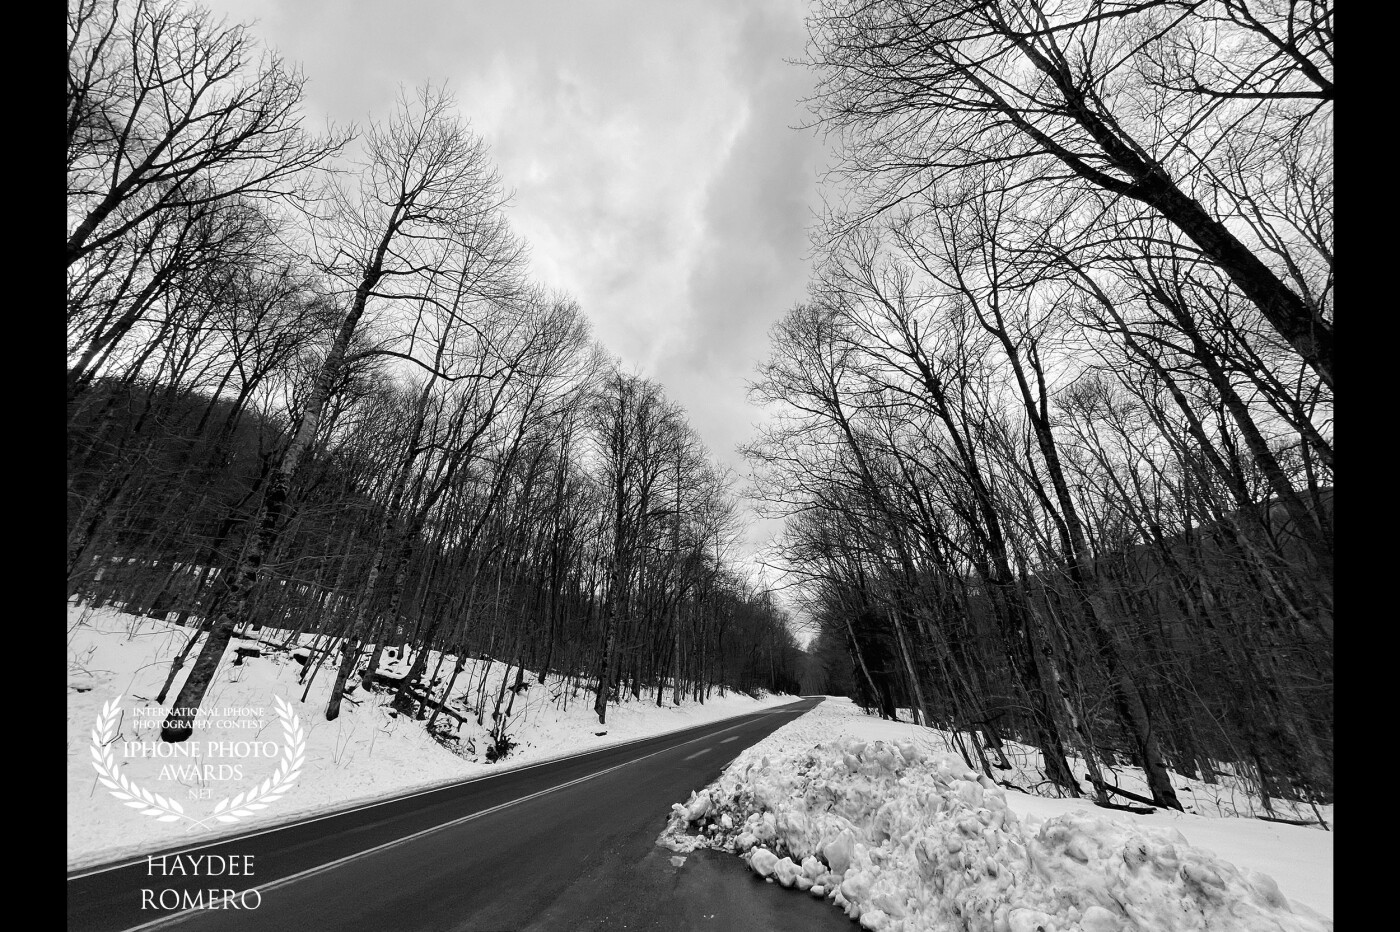 This black and white picture shows the Great Smoky Mountains National Park turned into a Winter Wonderland during snowfall in February as I drove up into the heights past leafless trees standing sentry on the cleared roadway.<br />
